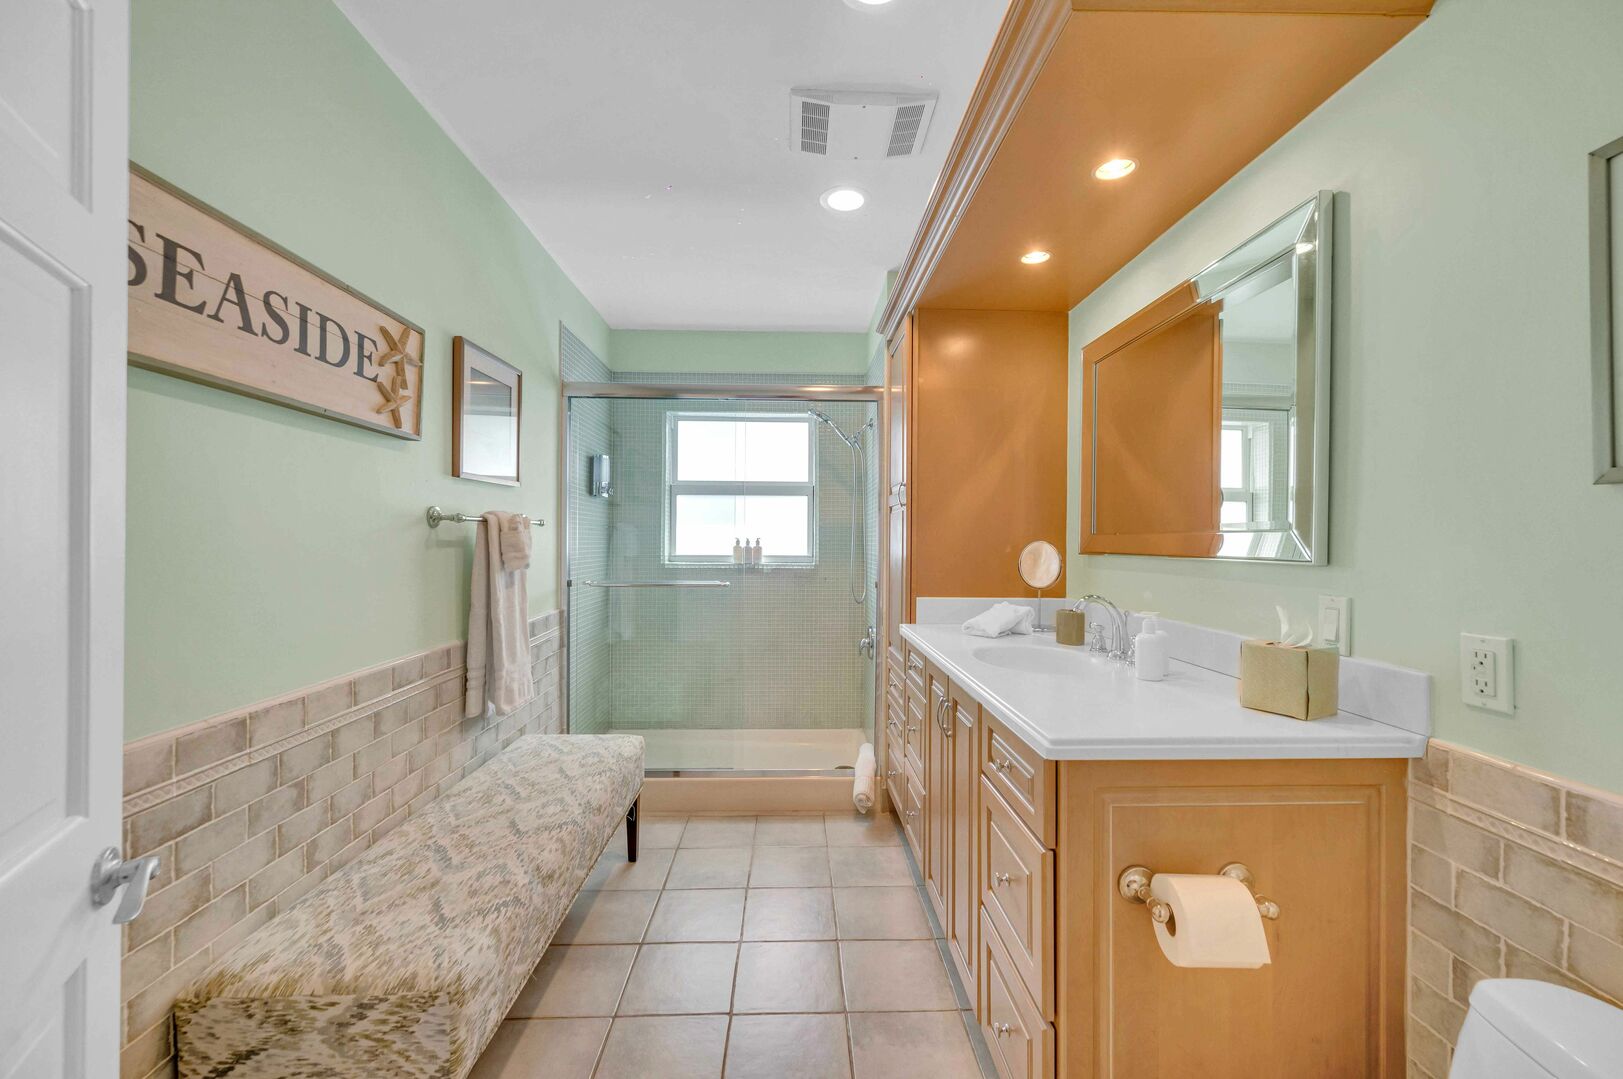 Guest bath with a spacious walk-in shower.